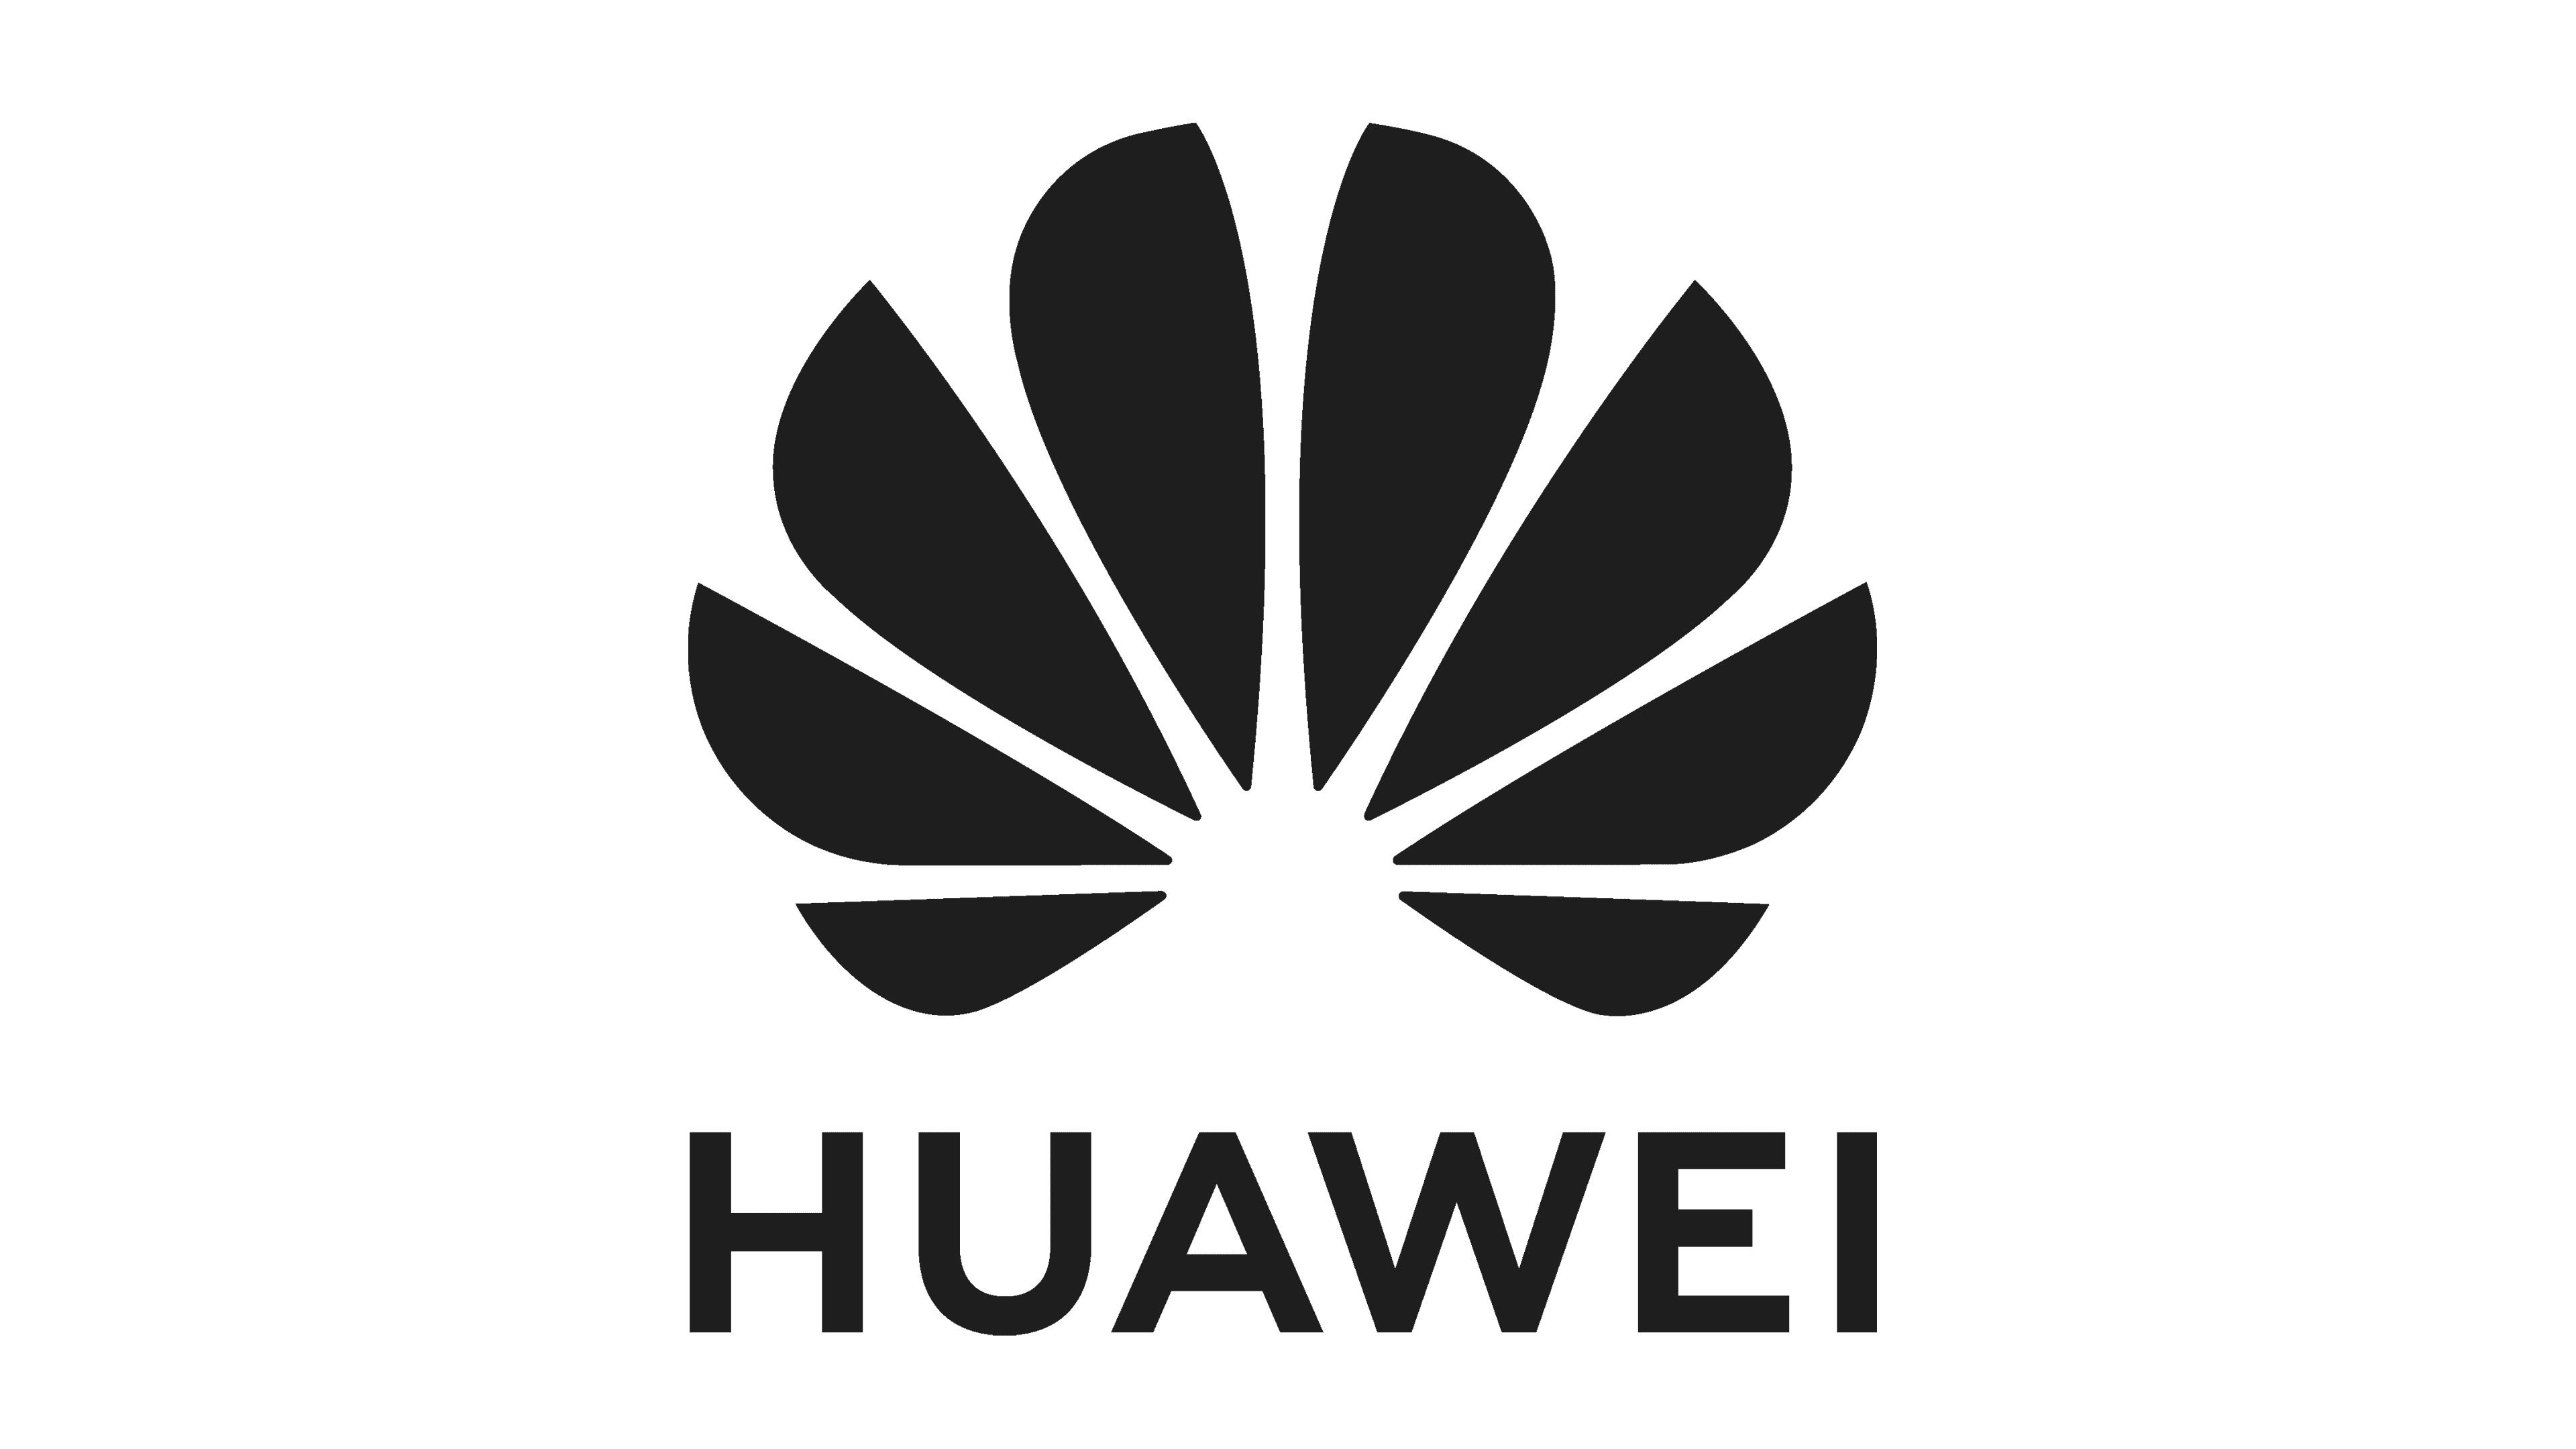 Huawei Logo, symbol, meaning, history, PNG 3840x2160